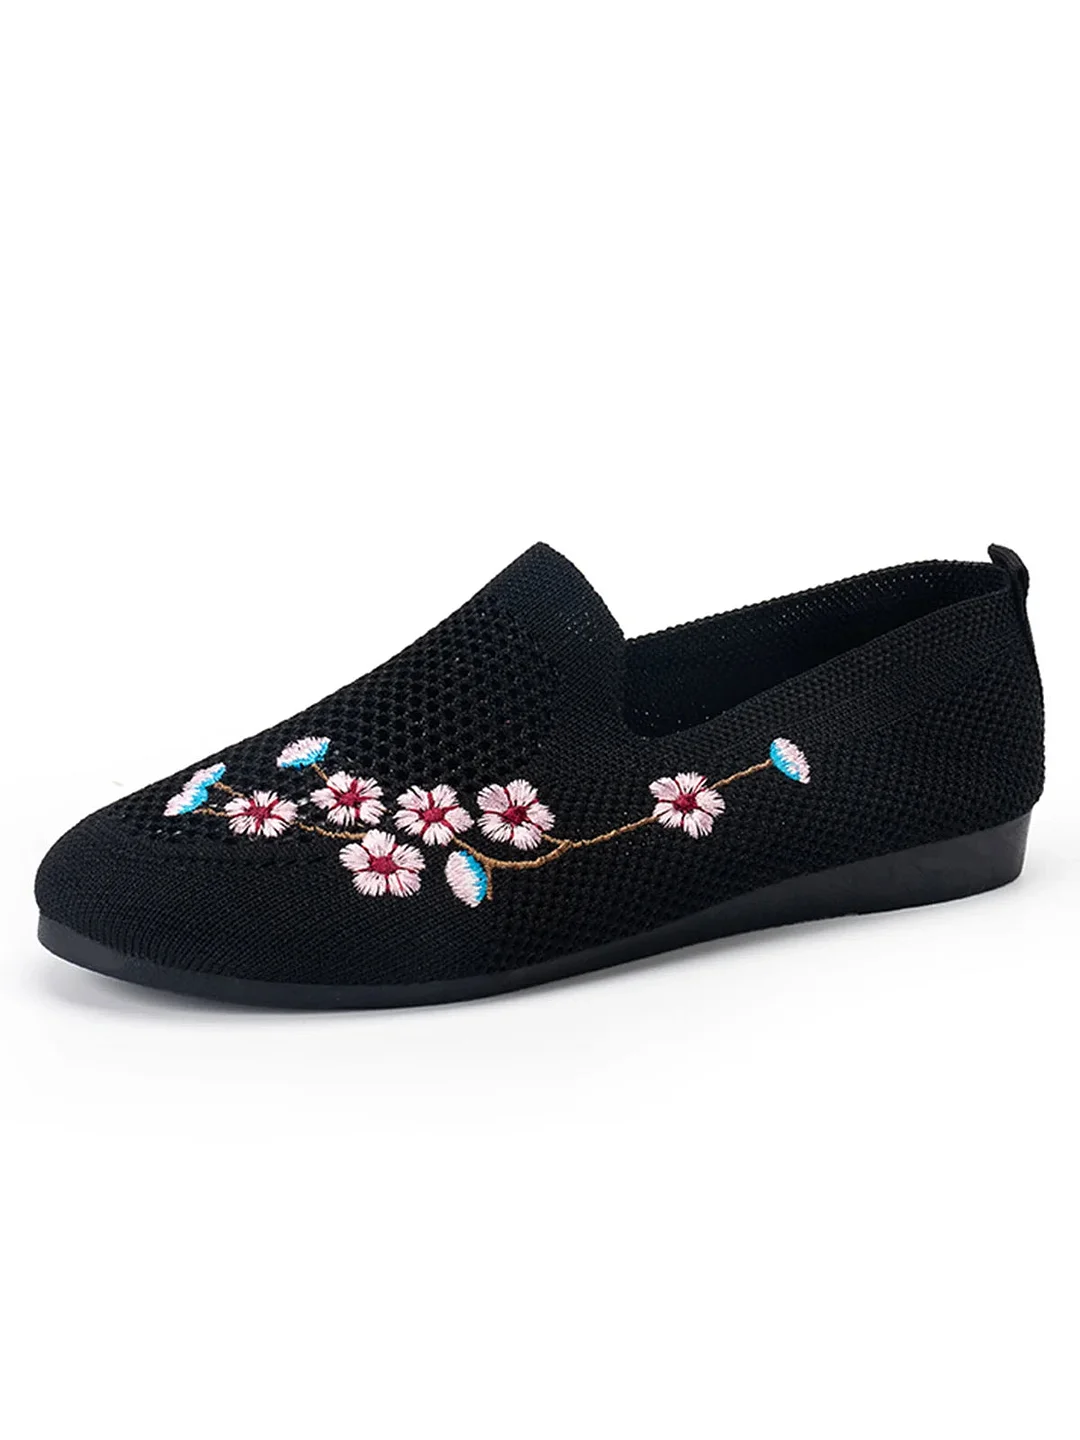 Women plus size clothing Floral Embroidery Breathable Mesh Fabric Flat Loafers-Nordswear